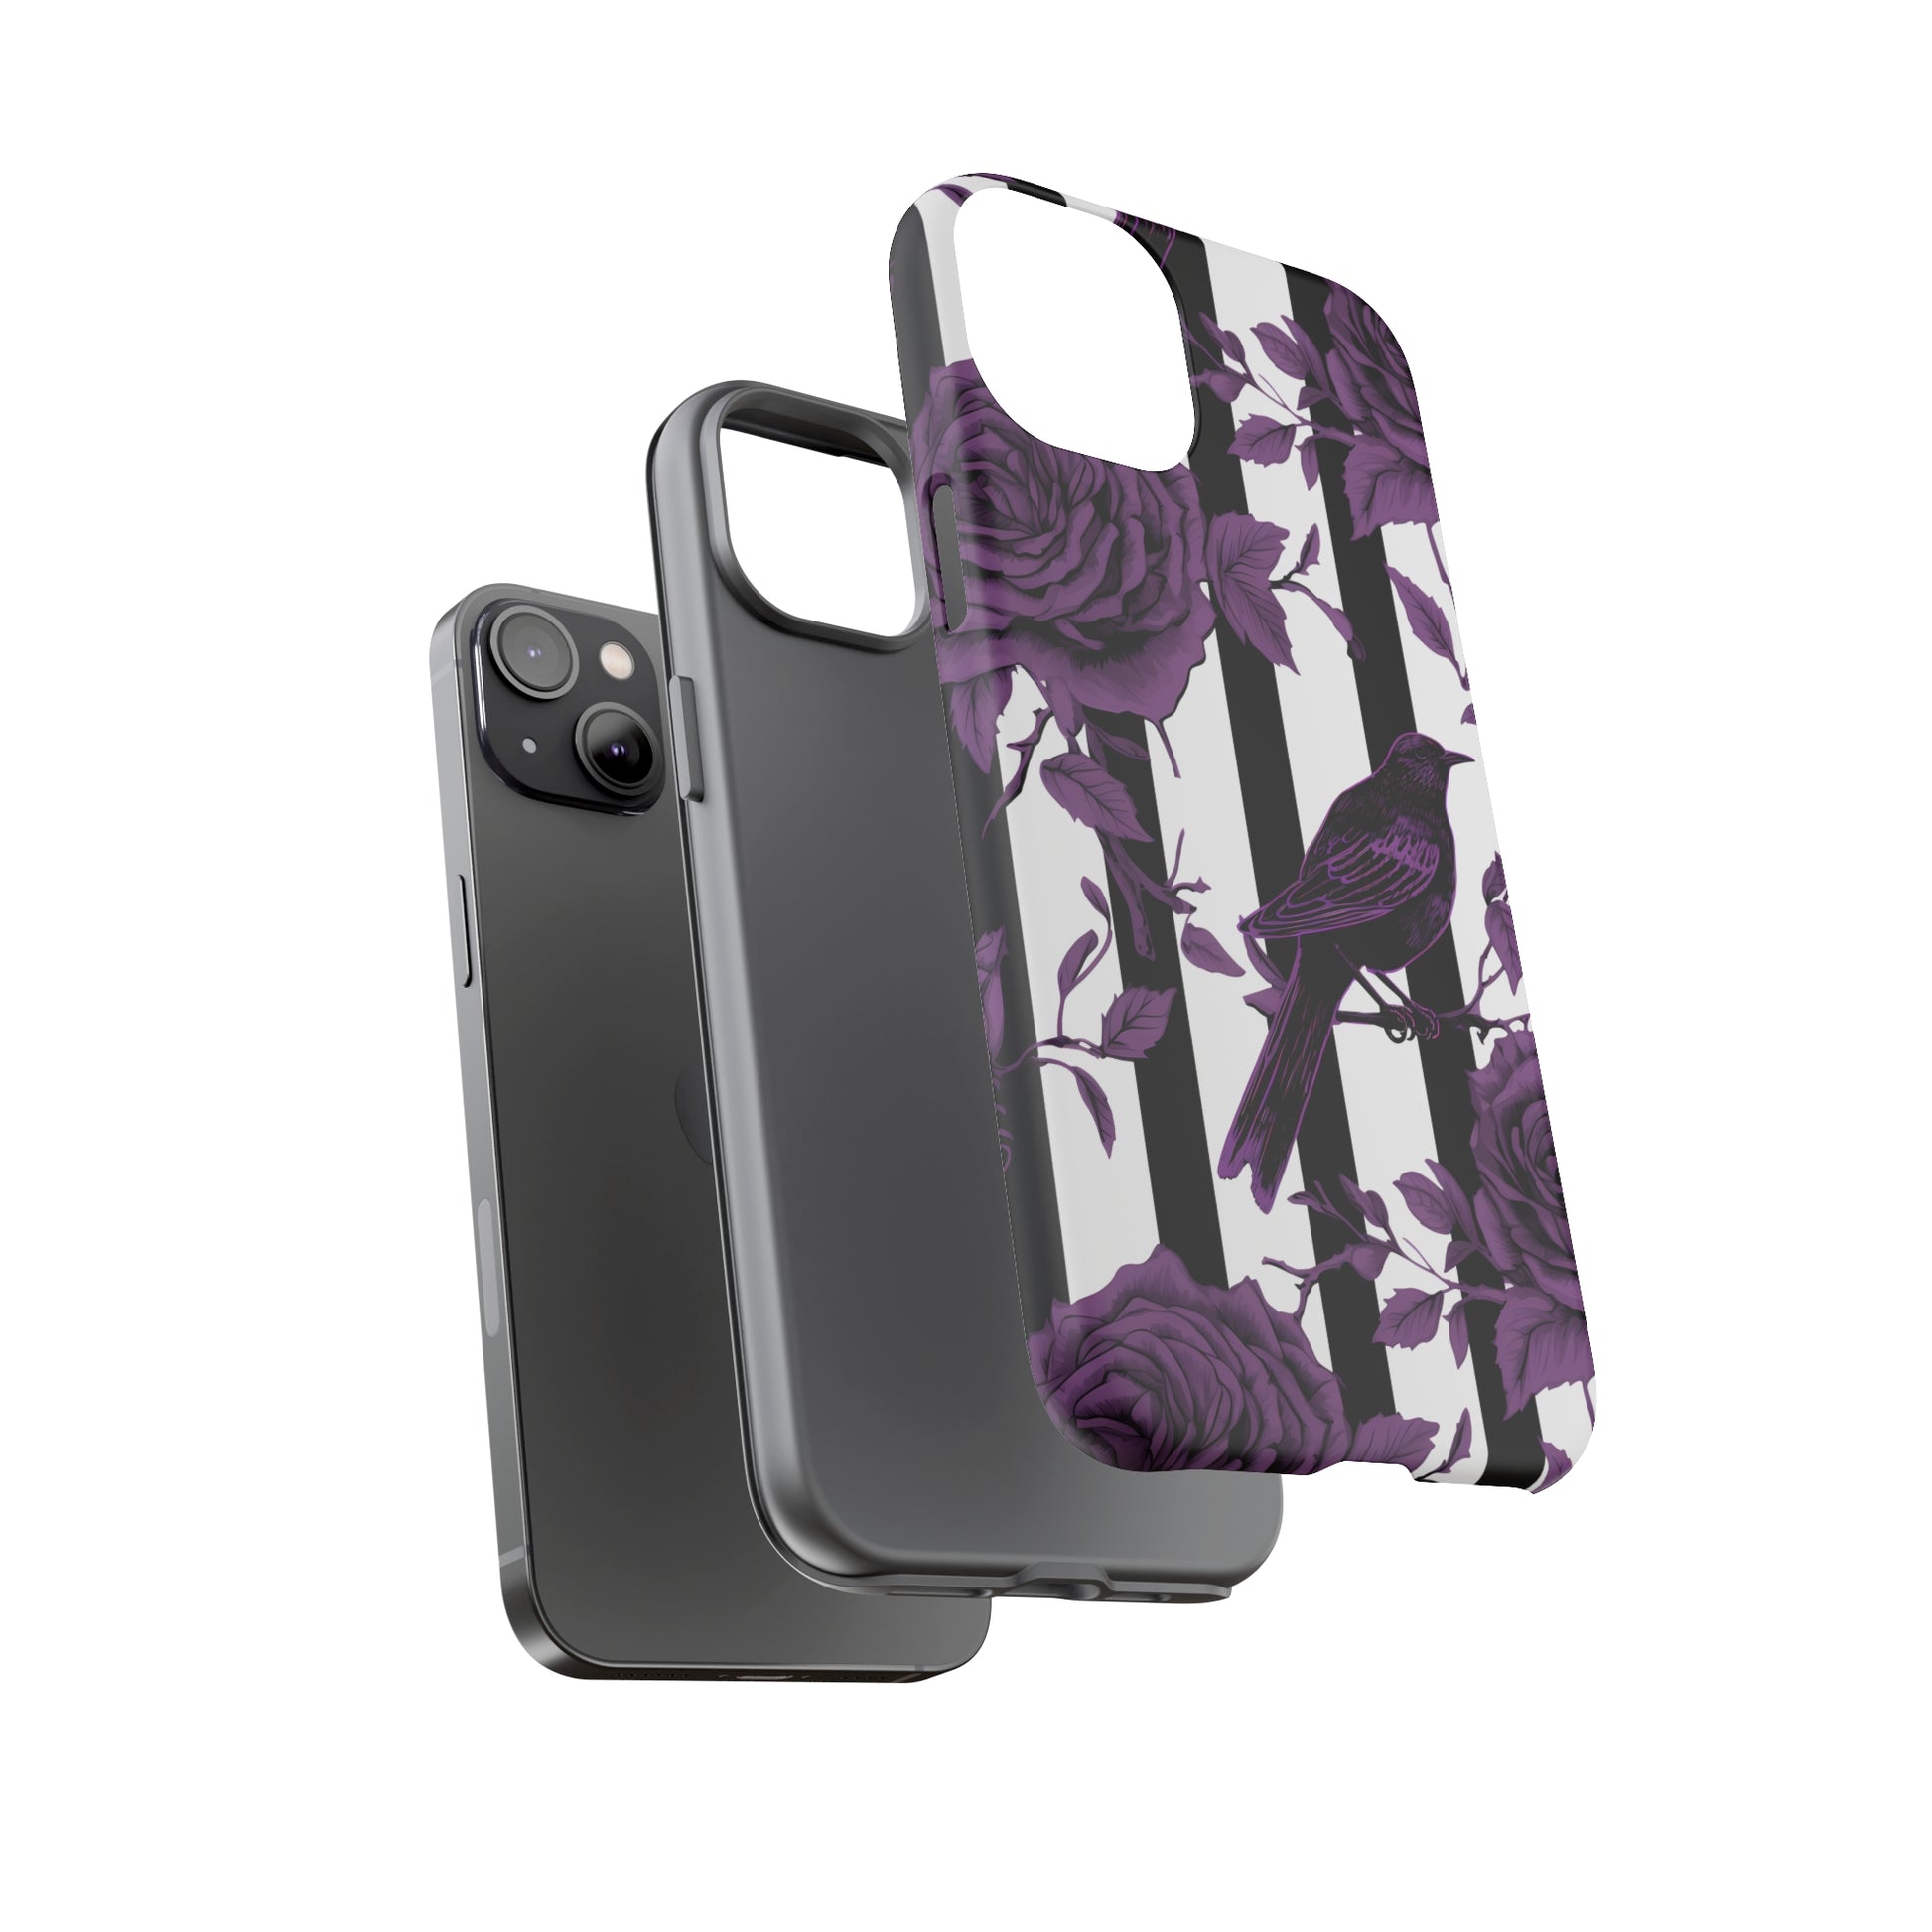 Striped Crows and Roses Tough Cases for iPhone Samsung Google PhonesPhone CaseVTZdesignsGoogle Pixel 6 ProGlossyAccessoriescrowsGlossy